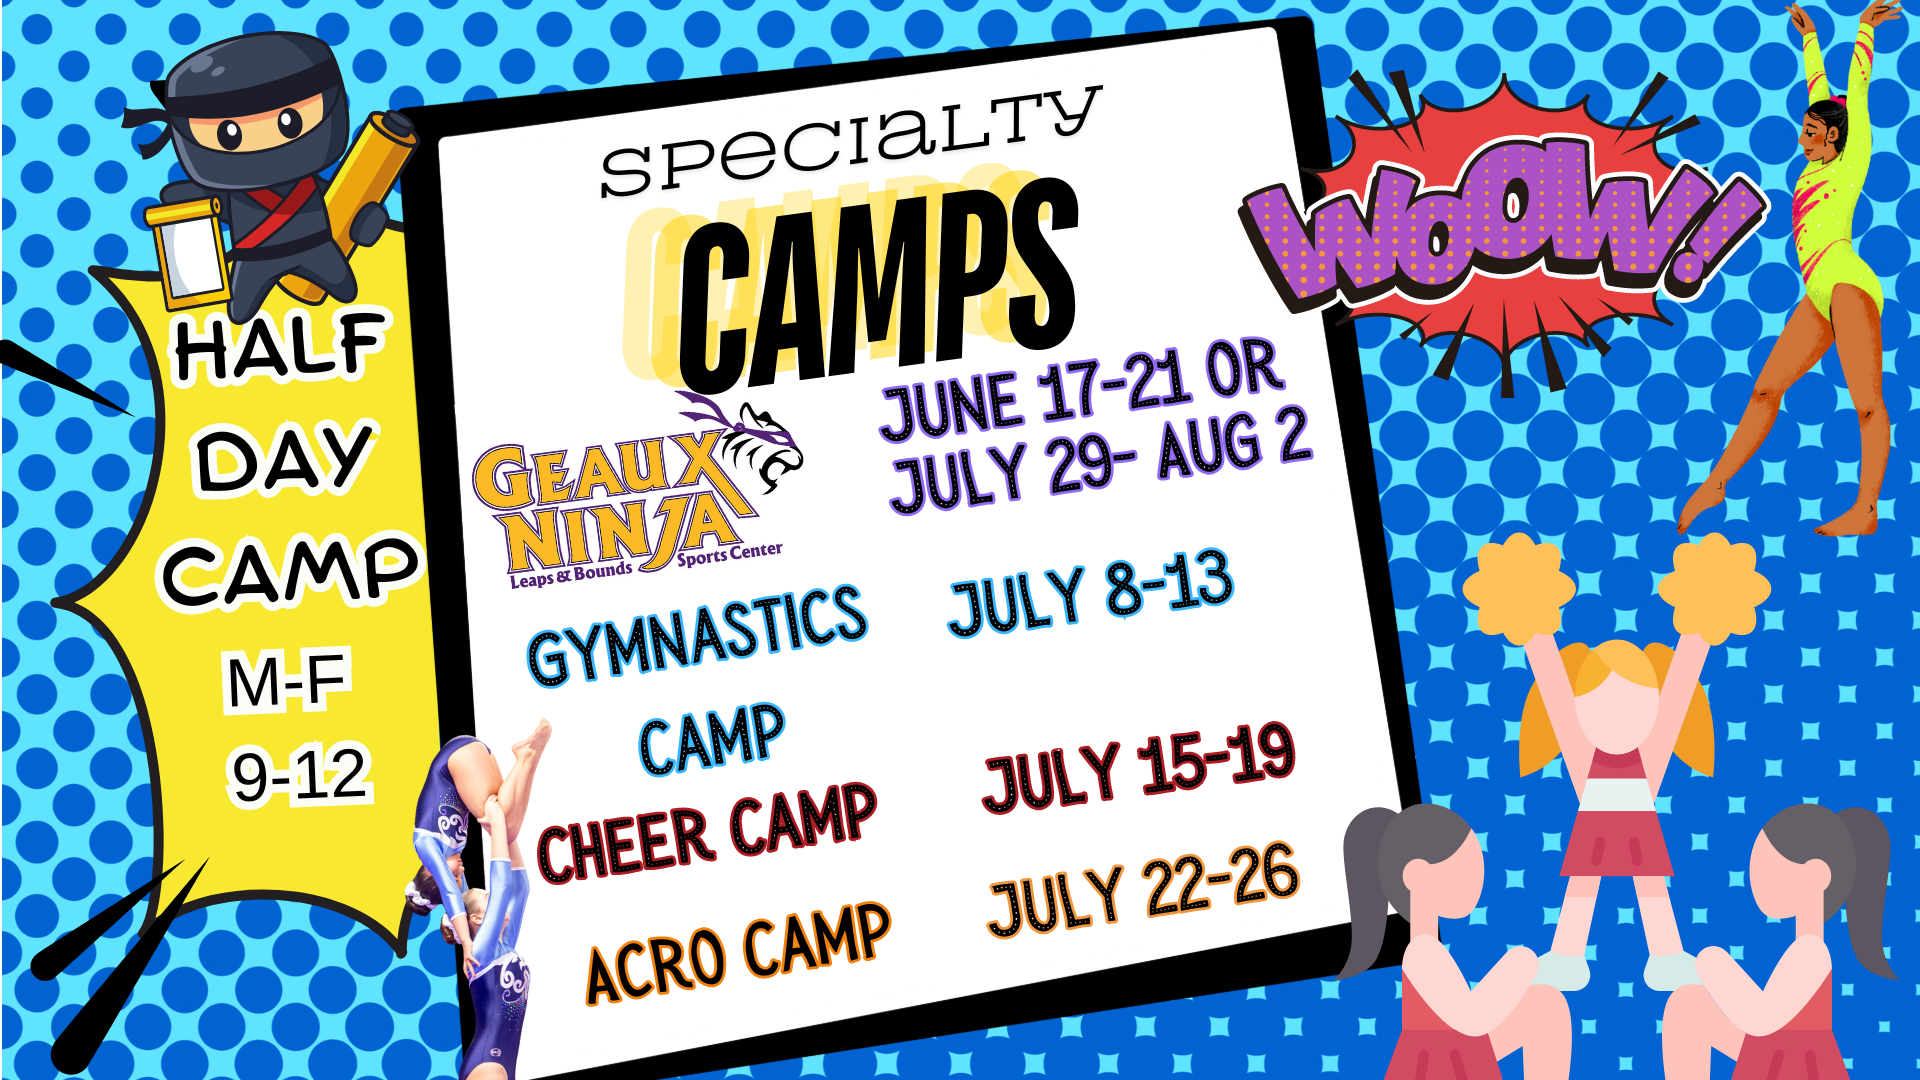 A colorful camp advertisement with "Half Day Camp M-F 9-12" on one side and "Specialty Camps" in the center. It lists dates for Geaux Ninja, Gymnastics, Cheer, and Acro camps. Illustrated characters of a ninja, gymnast, and cheerleaders surround the text. Your ultimate Birthday Party Venue!